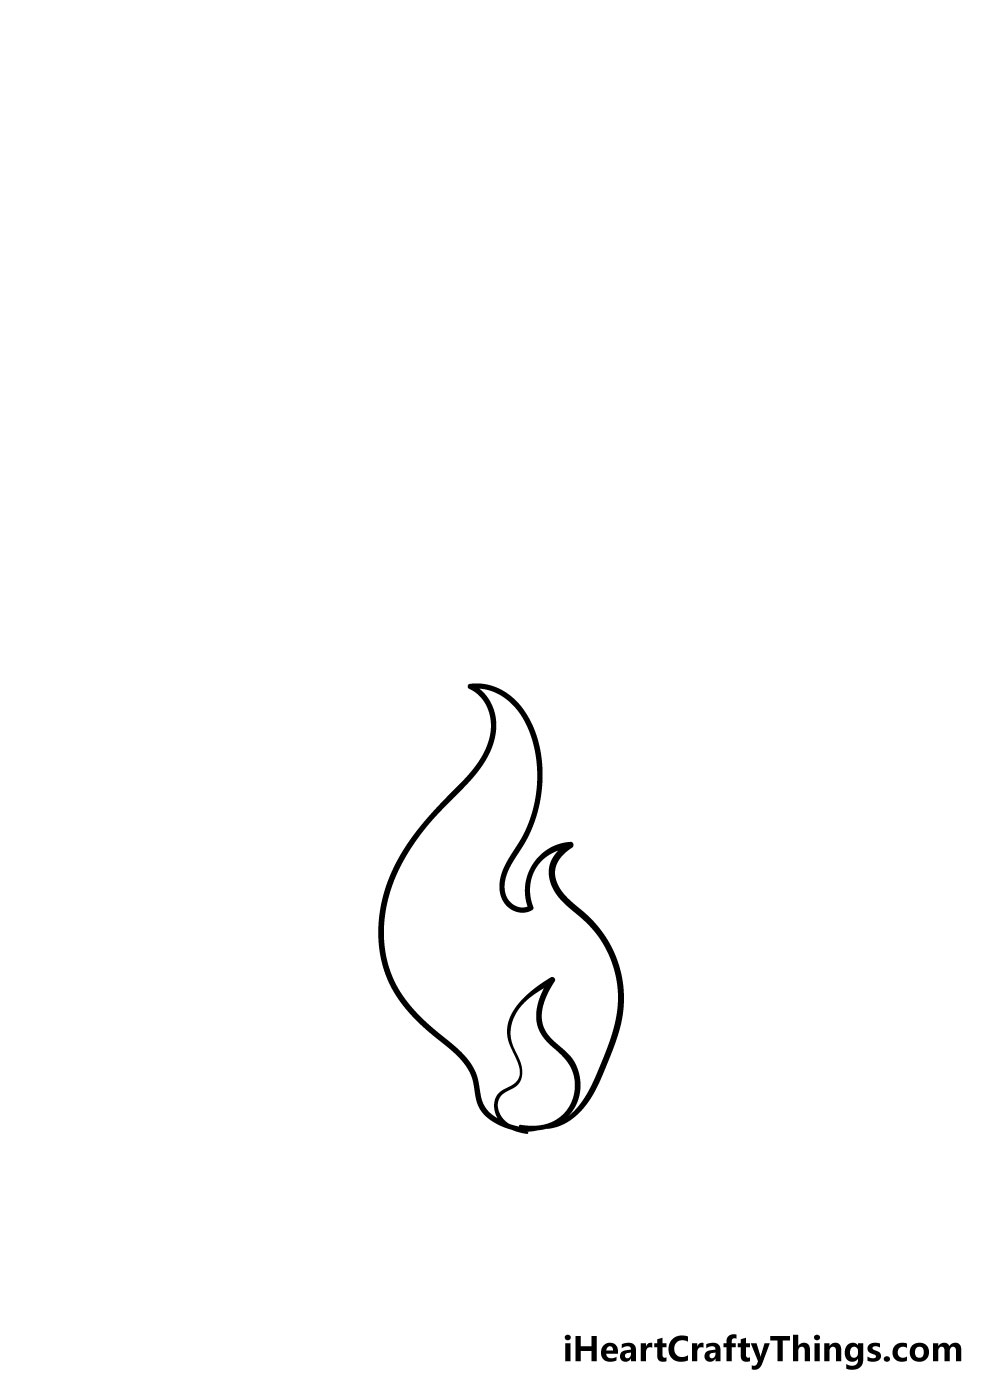 fire drawing step 2